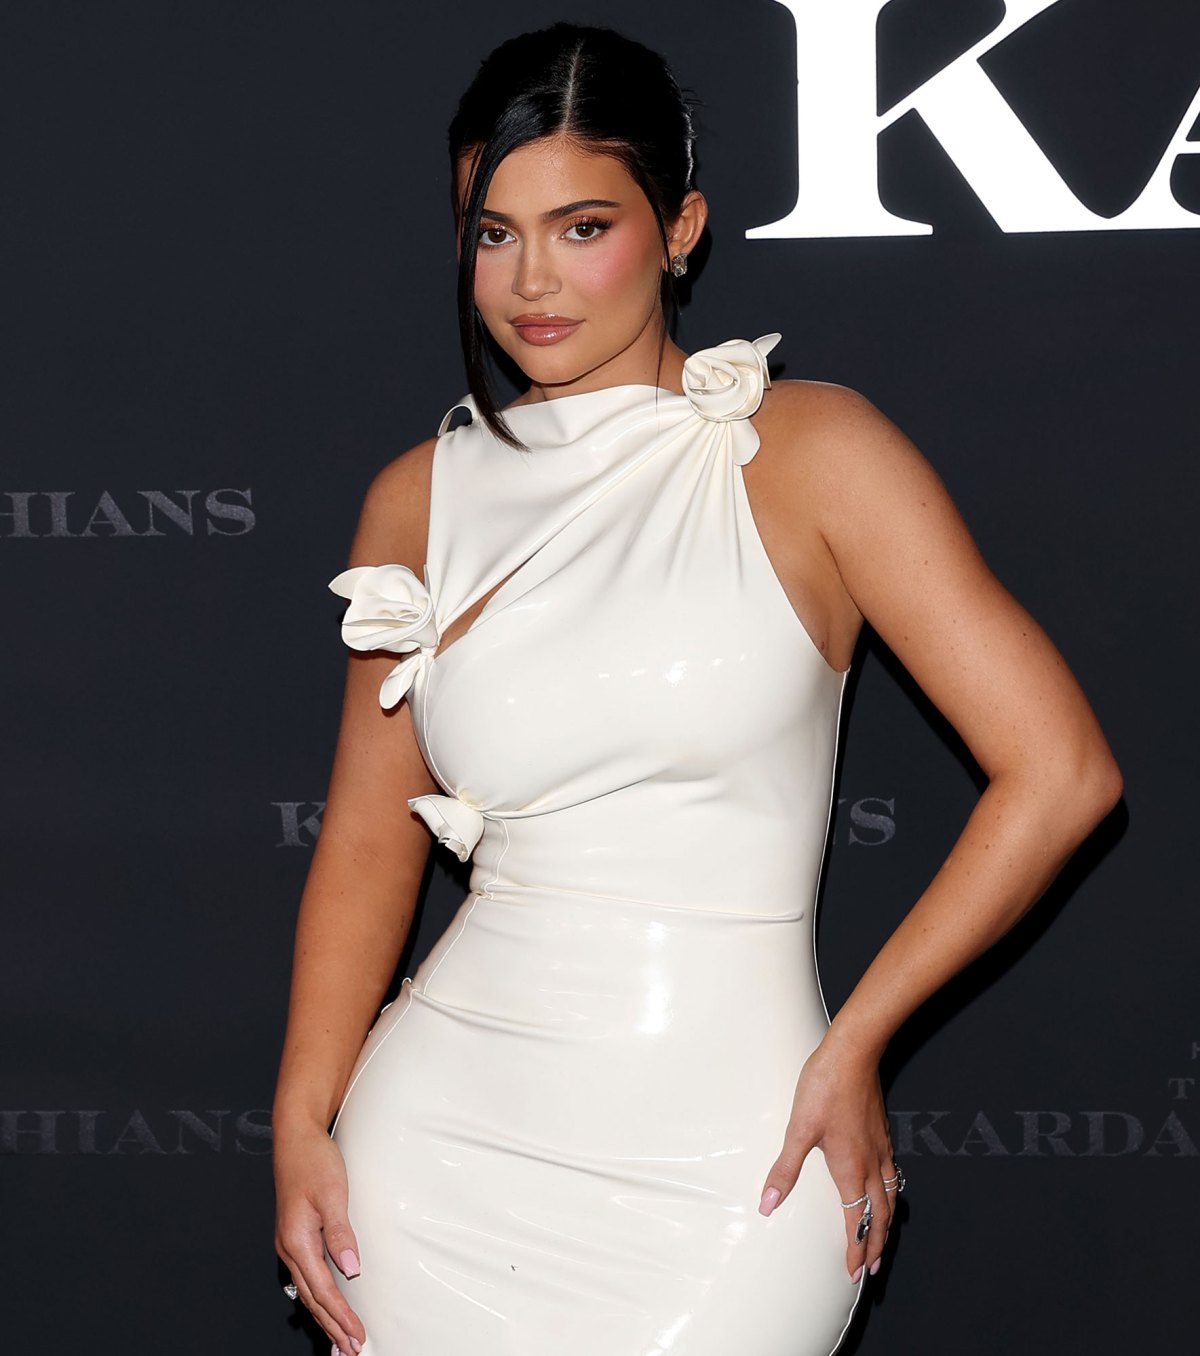 Kylie Jenner Wore a Cut-Out Gown & Kim Kardashian Wore Latex to